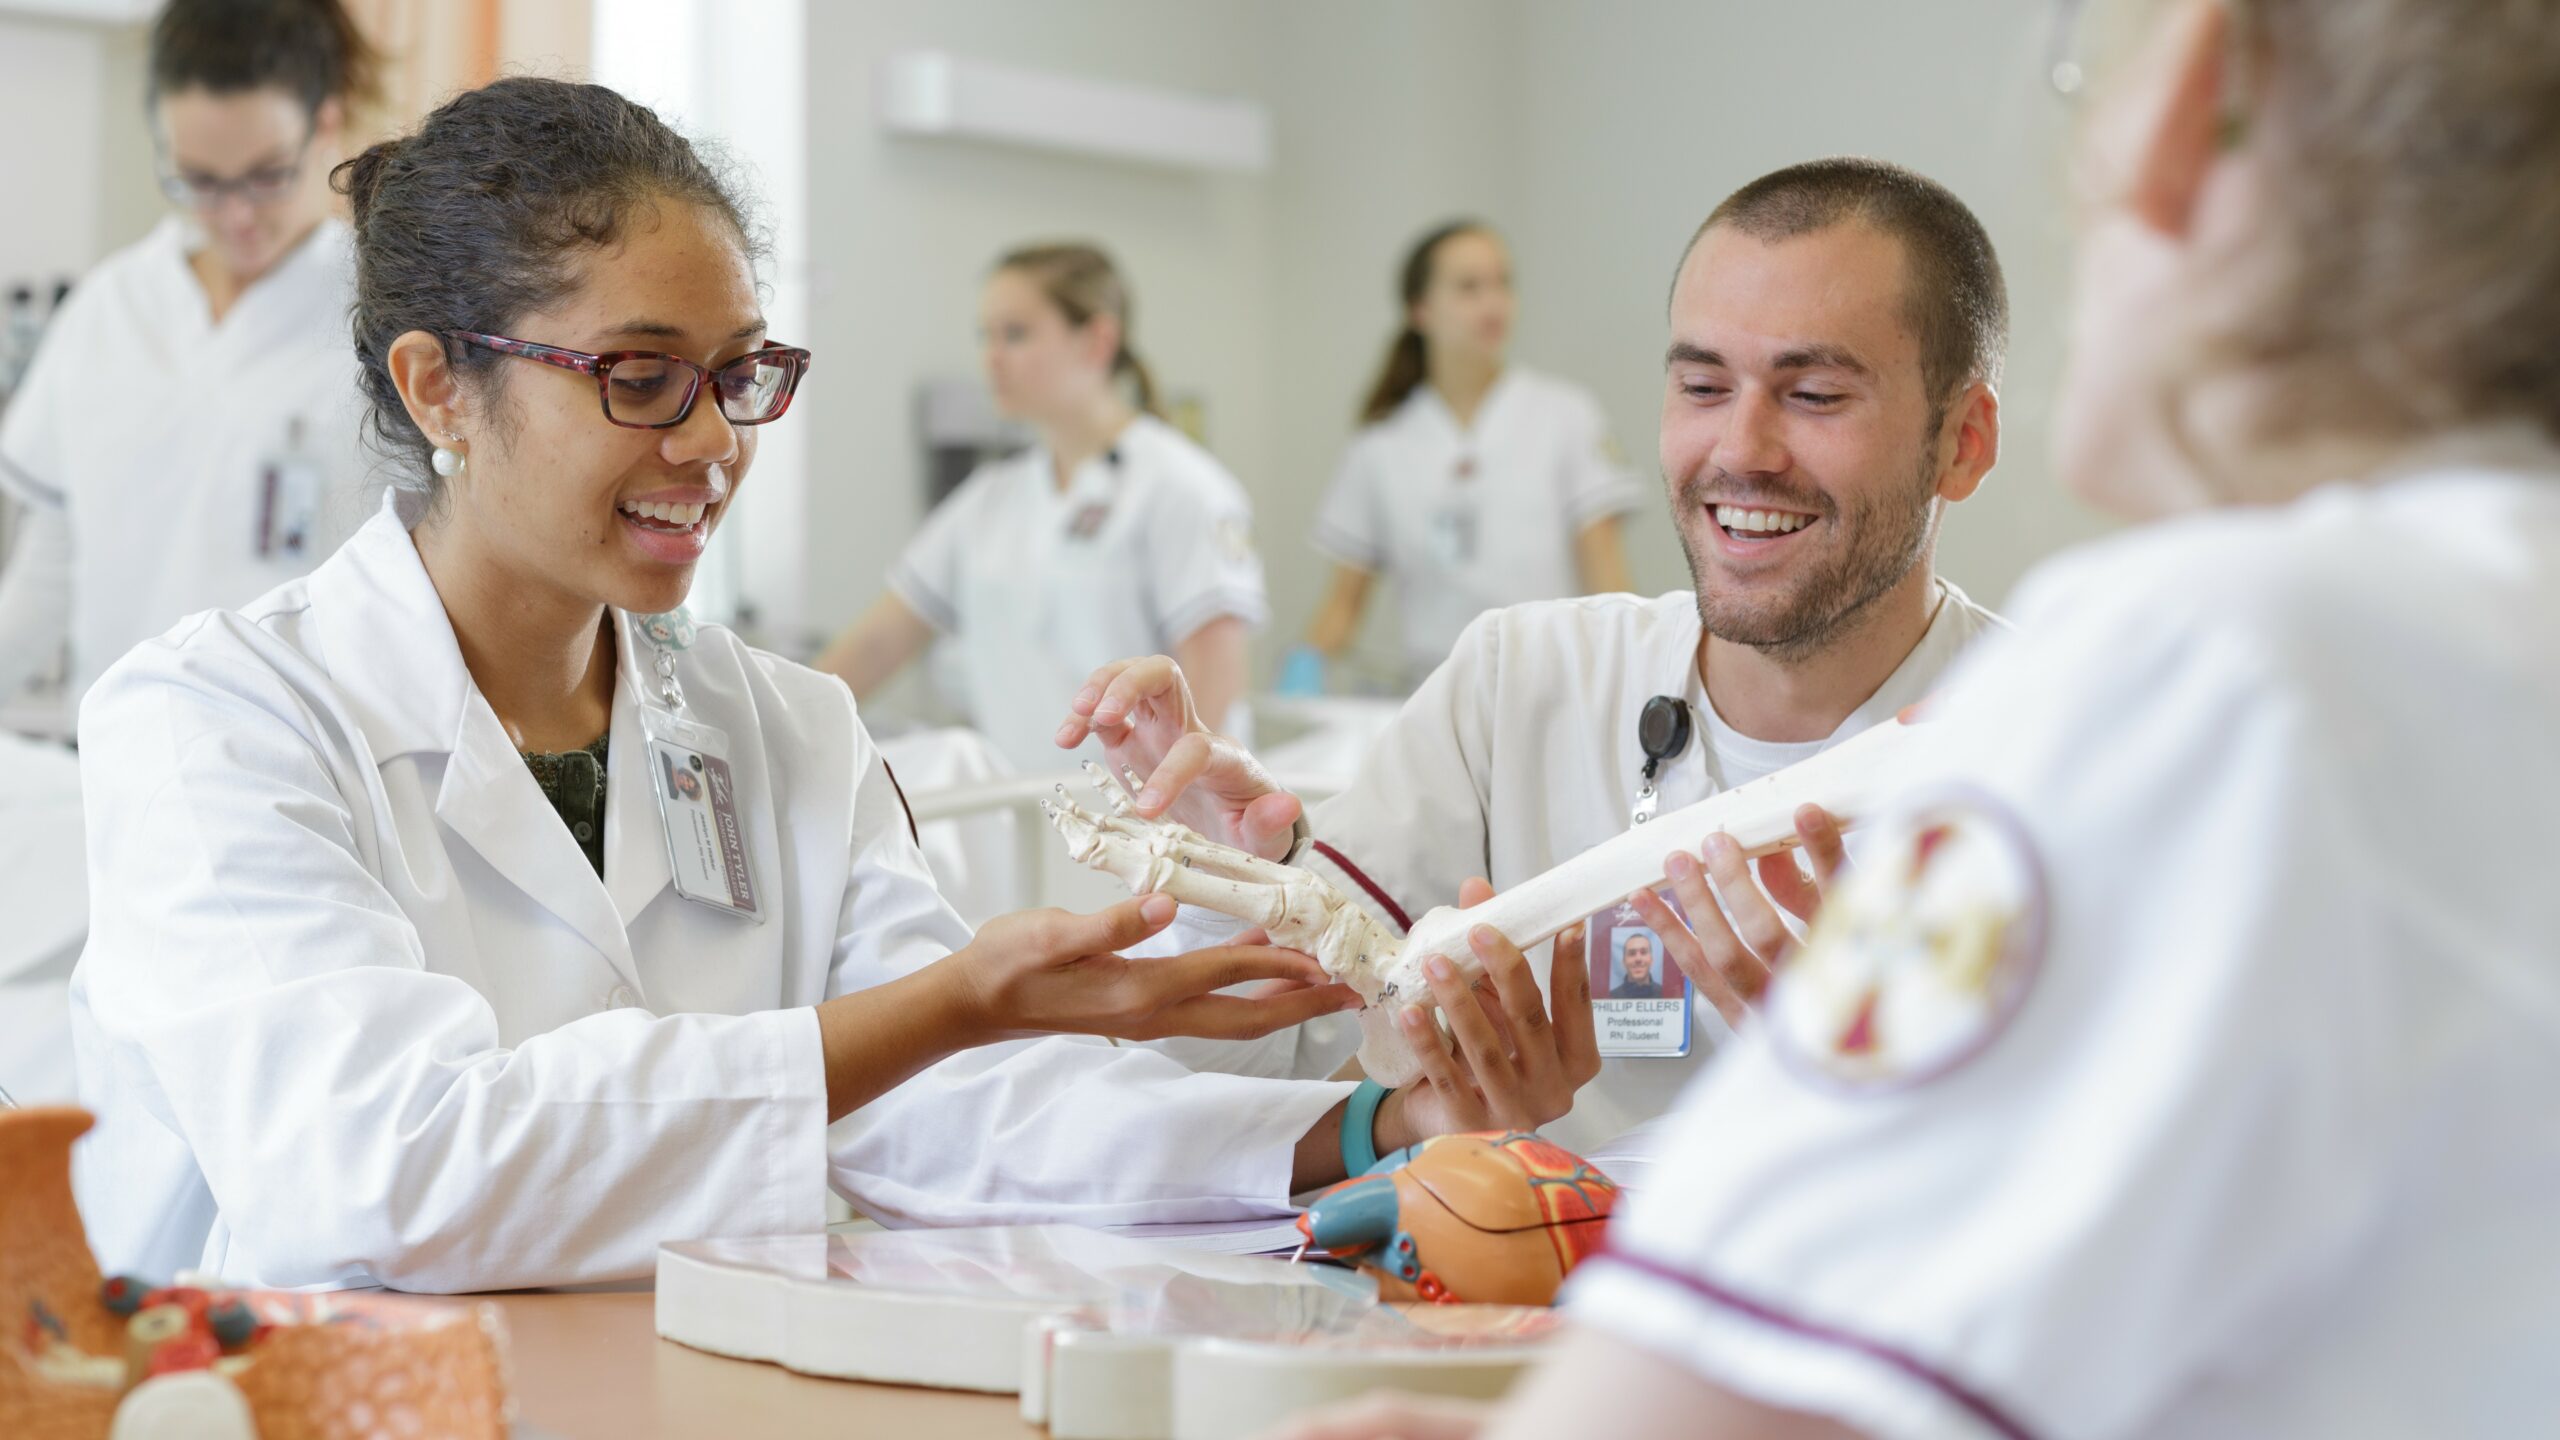 Medical Facilities of America Invests $500,000 to Expand High-Demand Licensed Practical Nursing Programs at Virginia’s Community Colleges